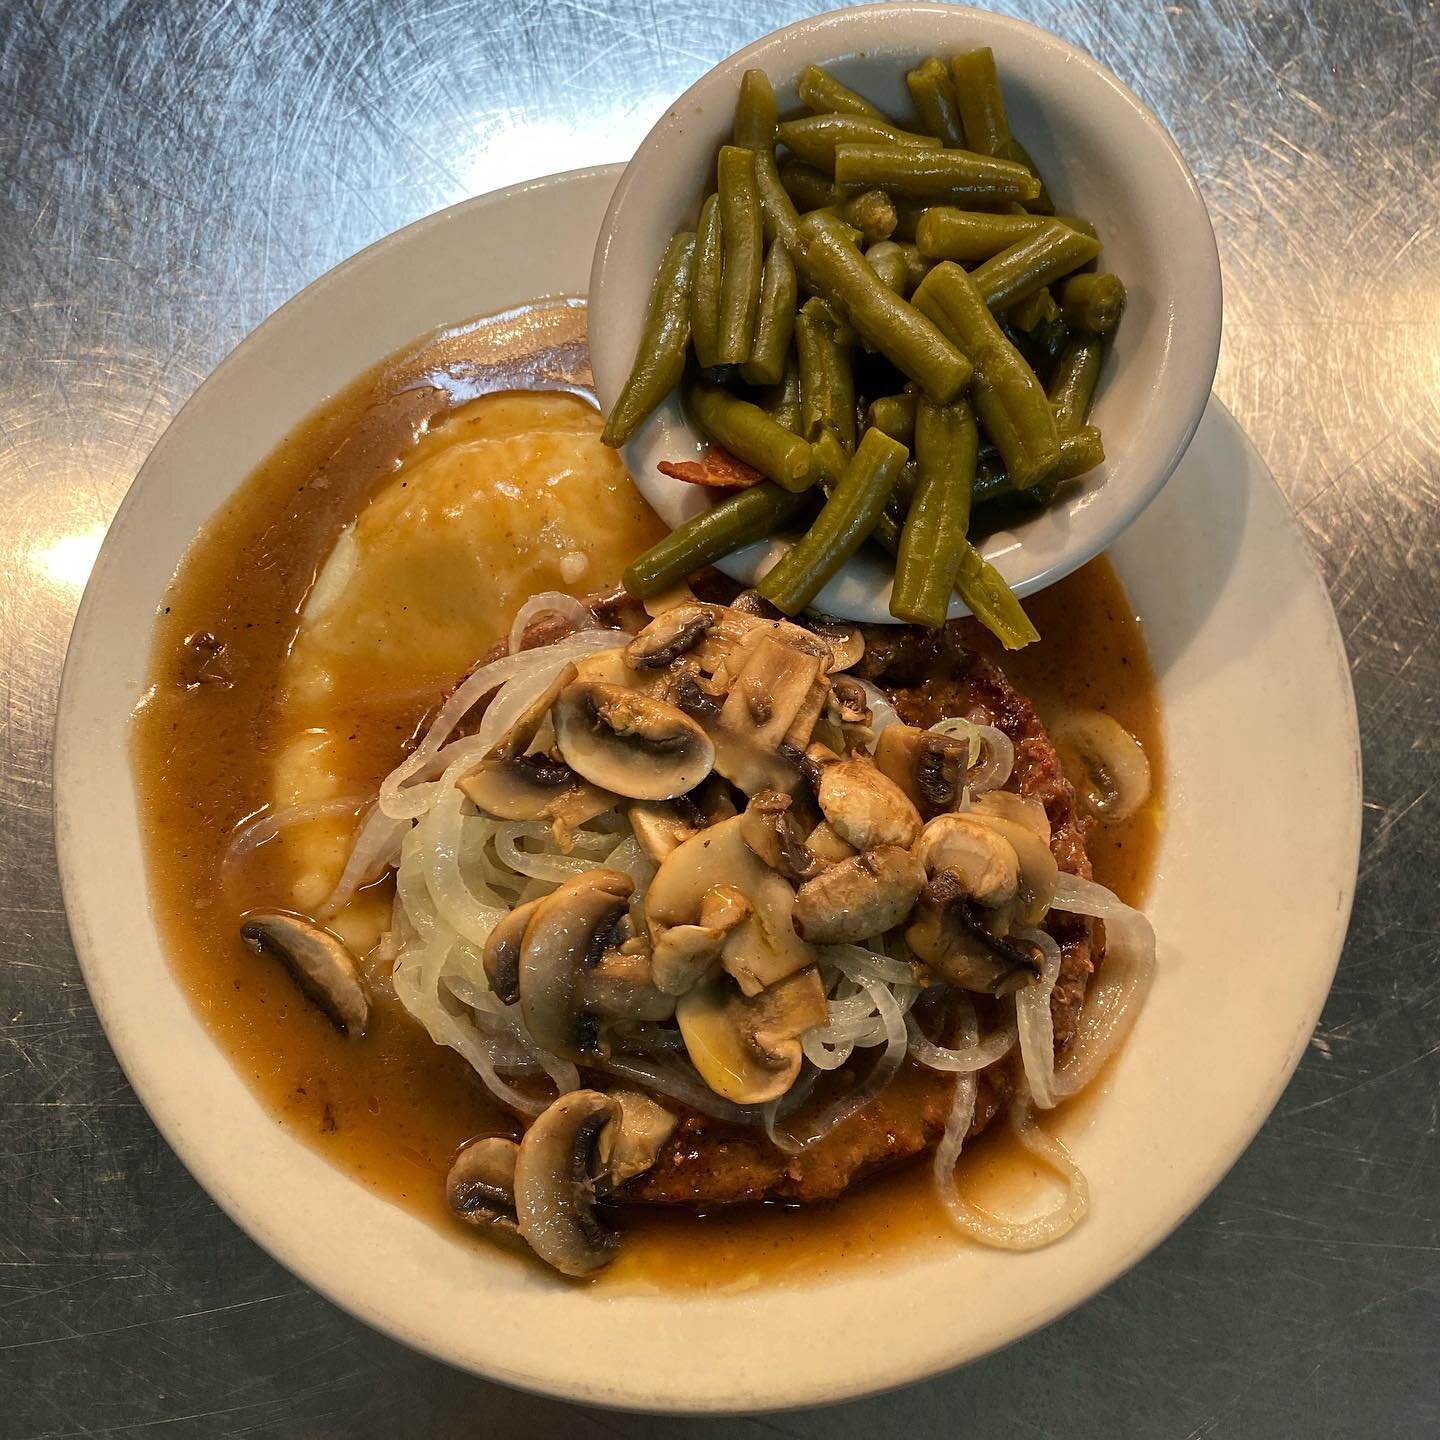 Loaded Hamburger Steak on special today from 11am-3pm while supplies last! Check out our story for side options and additional specials 😋
.
.
.
#backstreet #backstreetsinton #backstreetcafe #yum #homemade #steak #delicious #fresh #beef #special